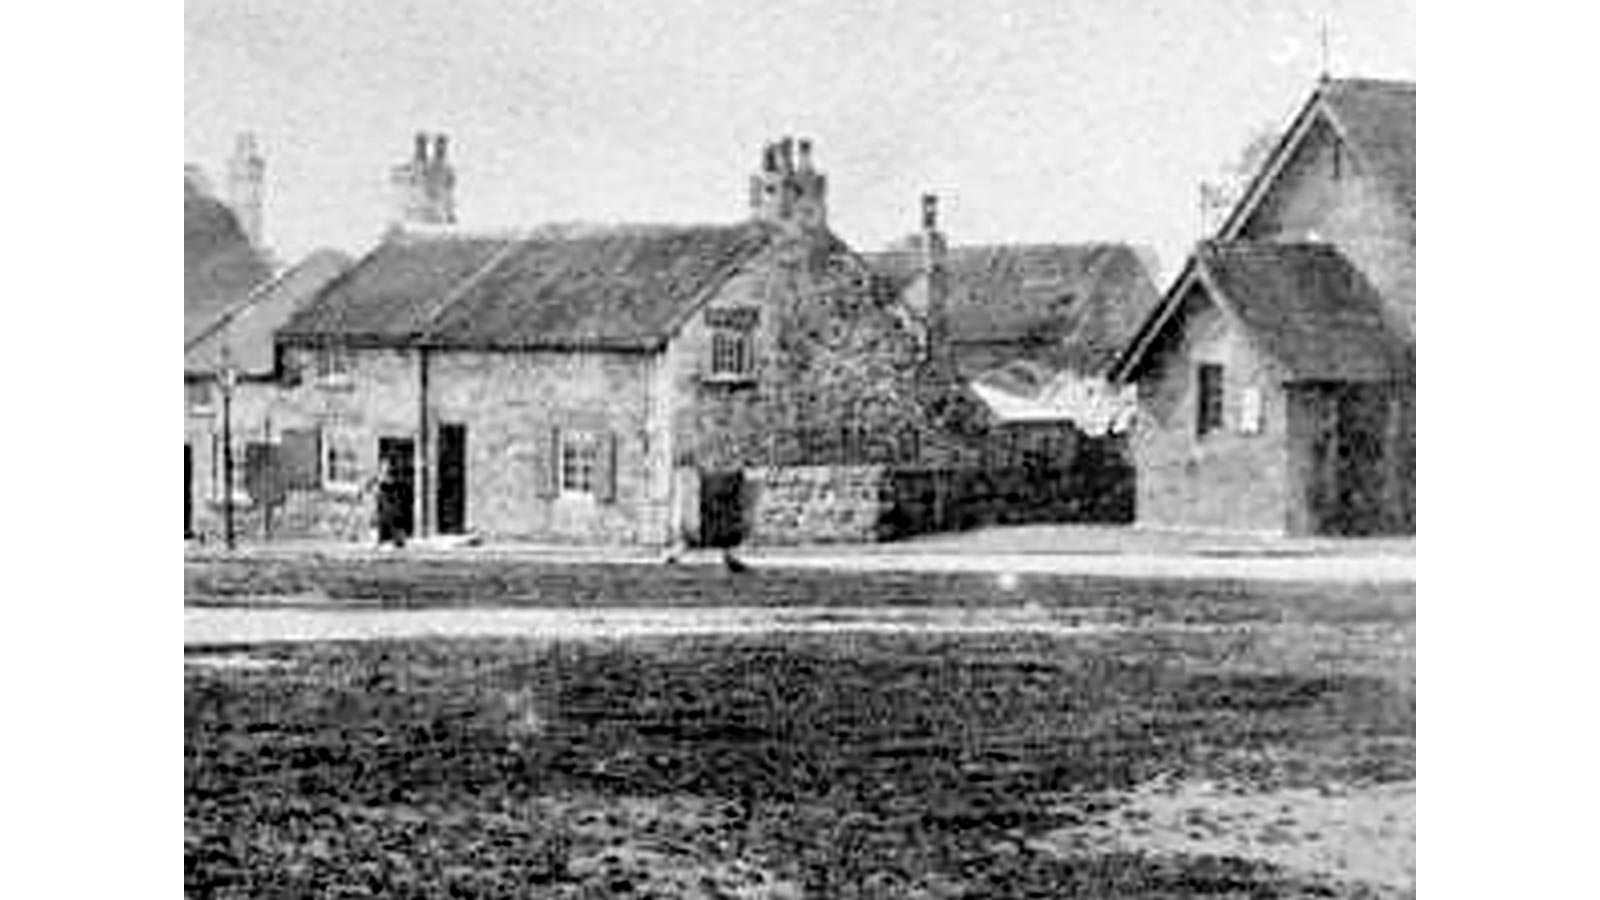 image of Walbottle Village Institute to the left of frame - 1920